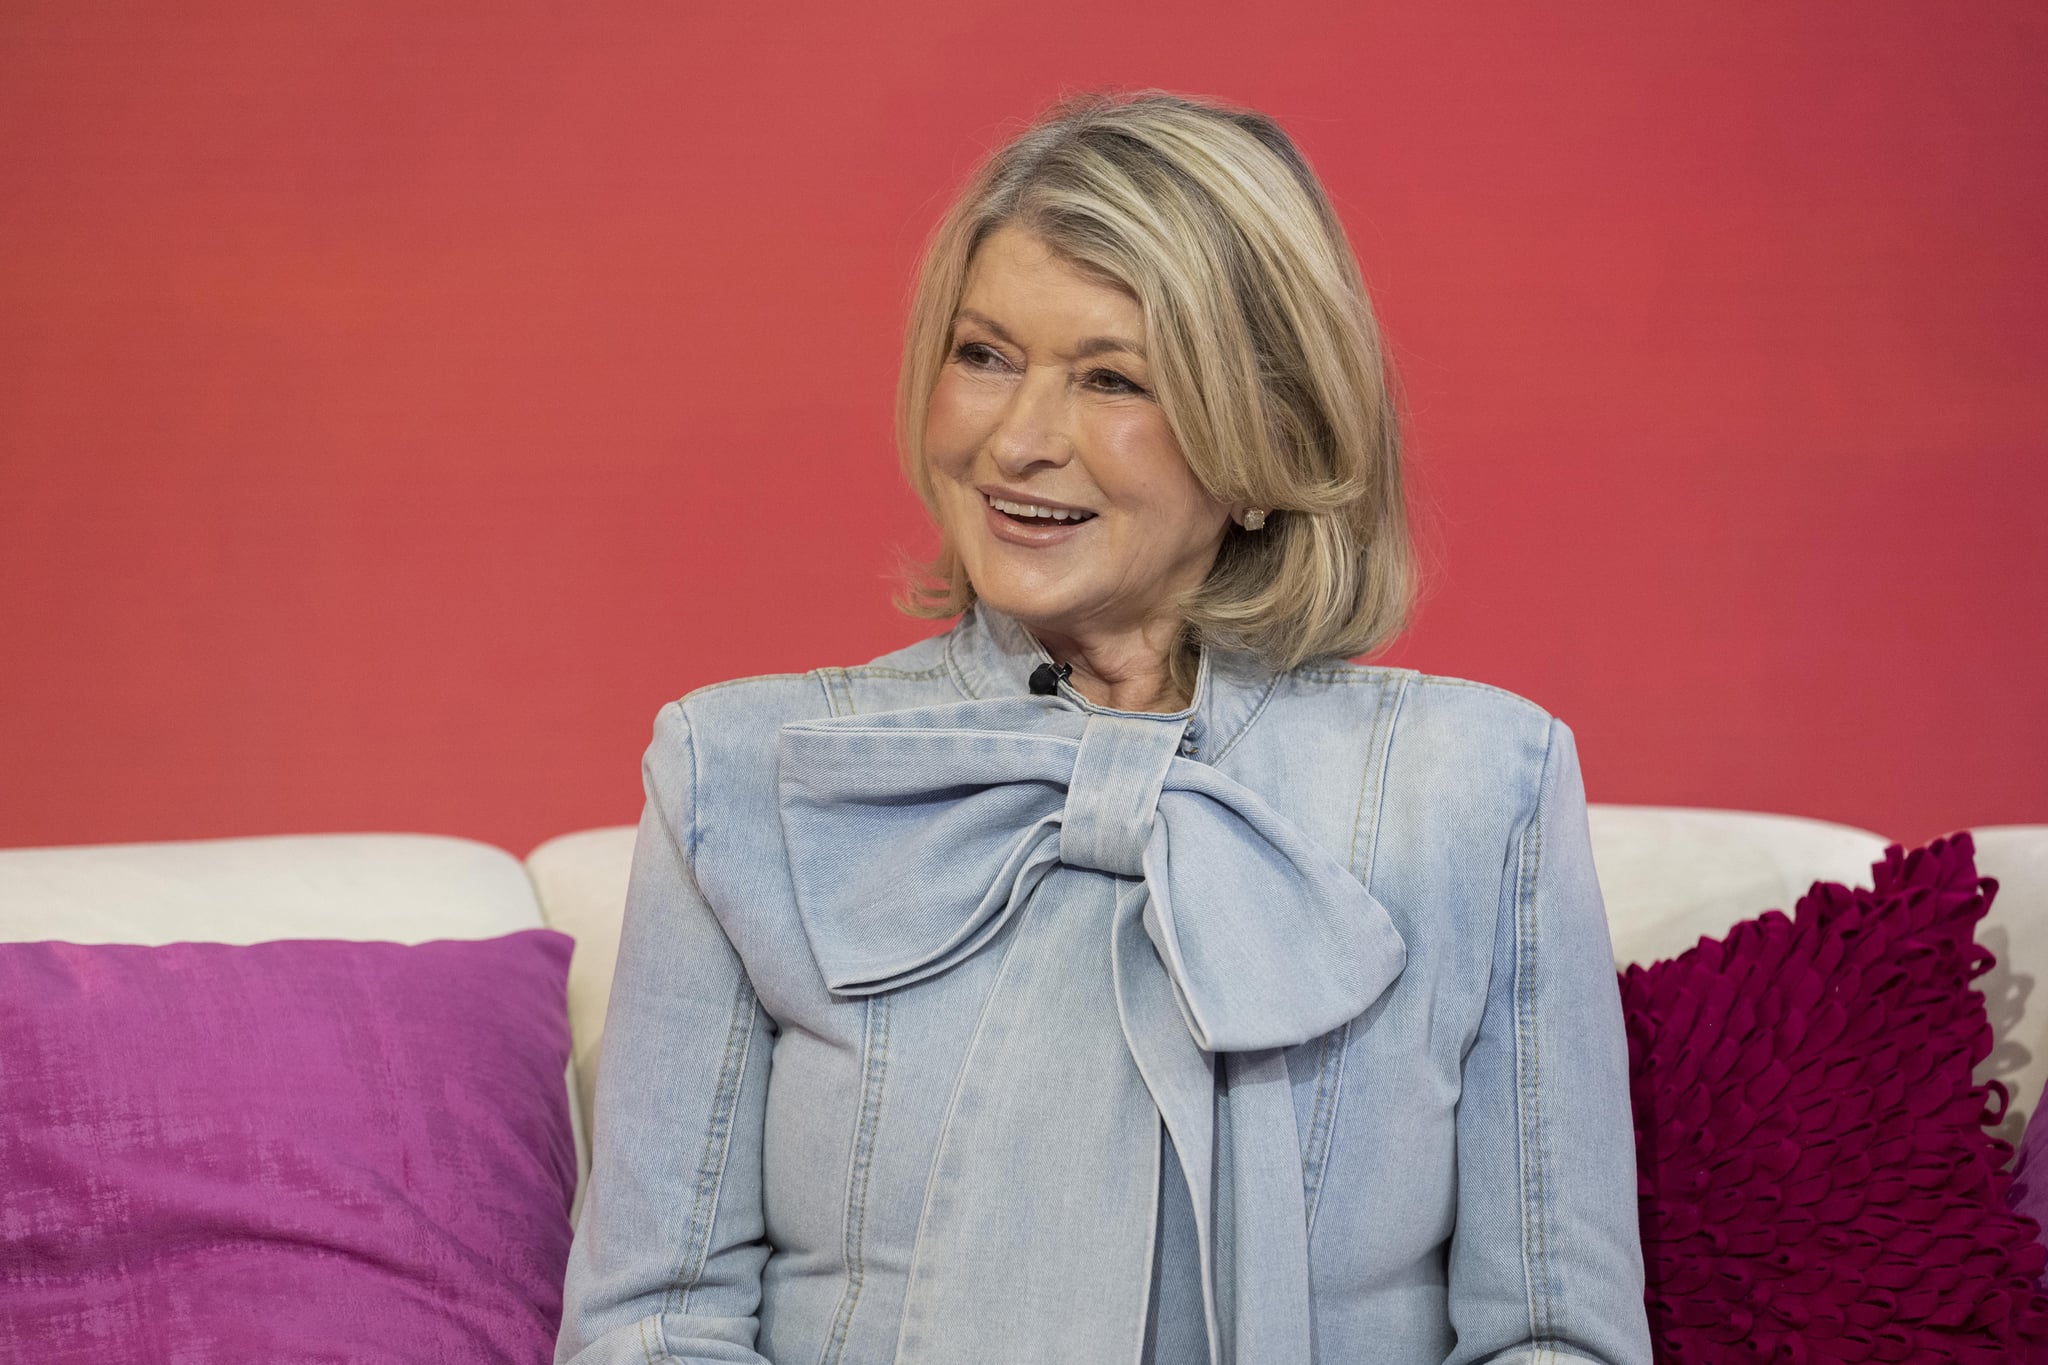 TODAY -- Pictured: Martha Stewart on Thursday, November 3, 2022 -- (Photo by: Nathan Congleton/NBC via Getty Images)